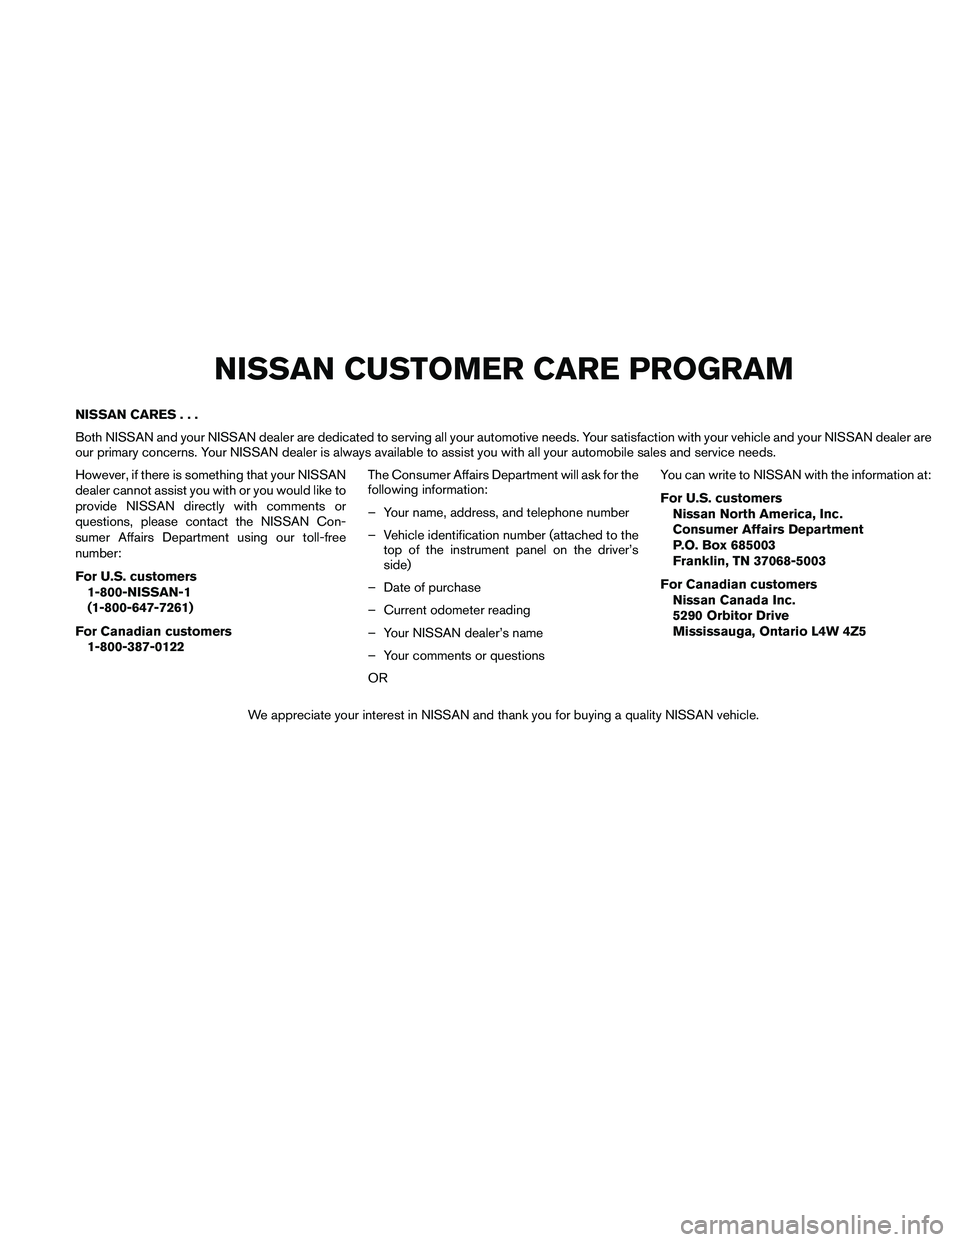 NISSAN ALTIMA 2010  Owners Manual NISSAN CARES...
Both NISSAN and your NISSAN dealer are dedicated to serving all your automotive needs. Your satisfaction with your vehicle and your NISSAN dealer are
our primary concerns. Your NISSAN 